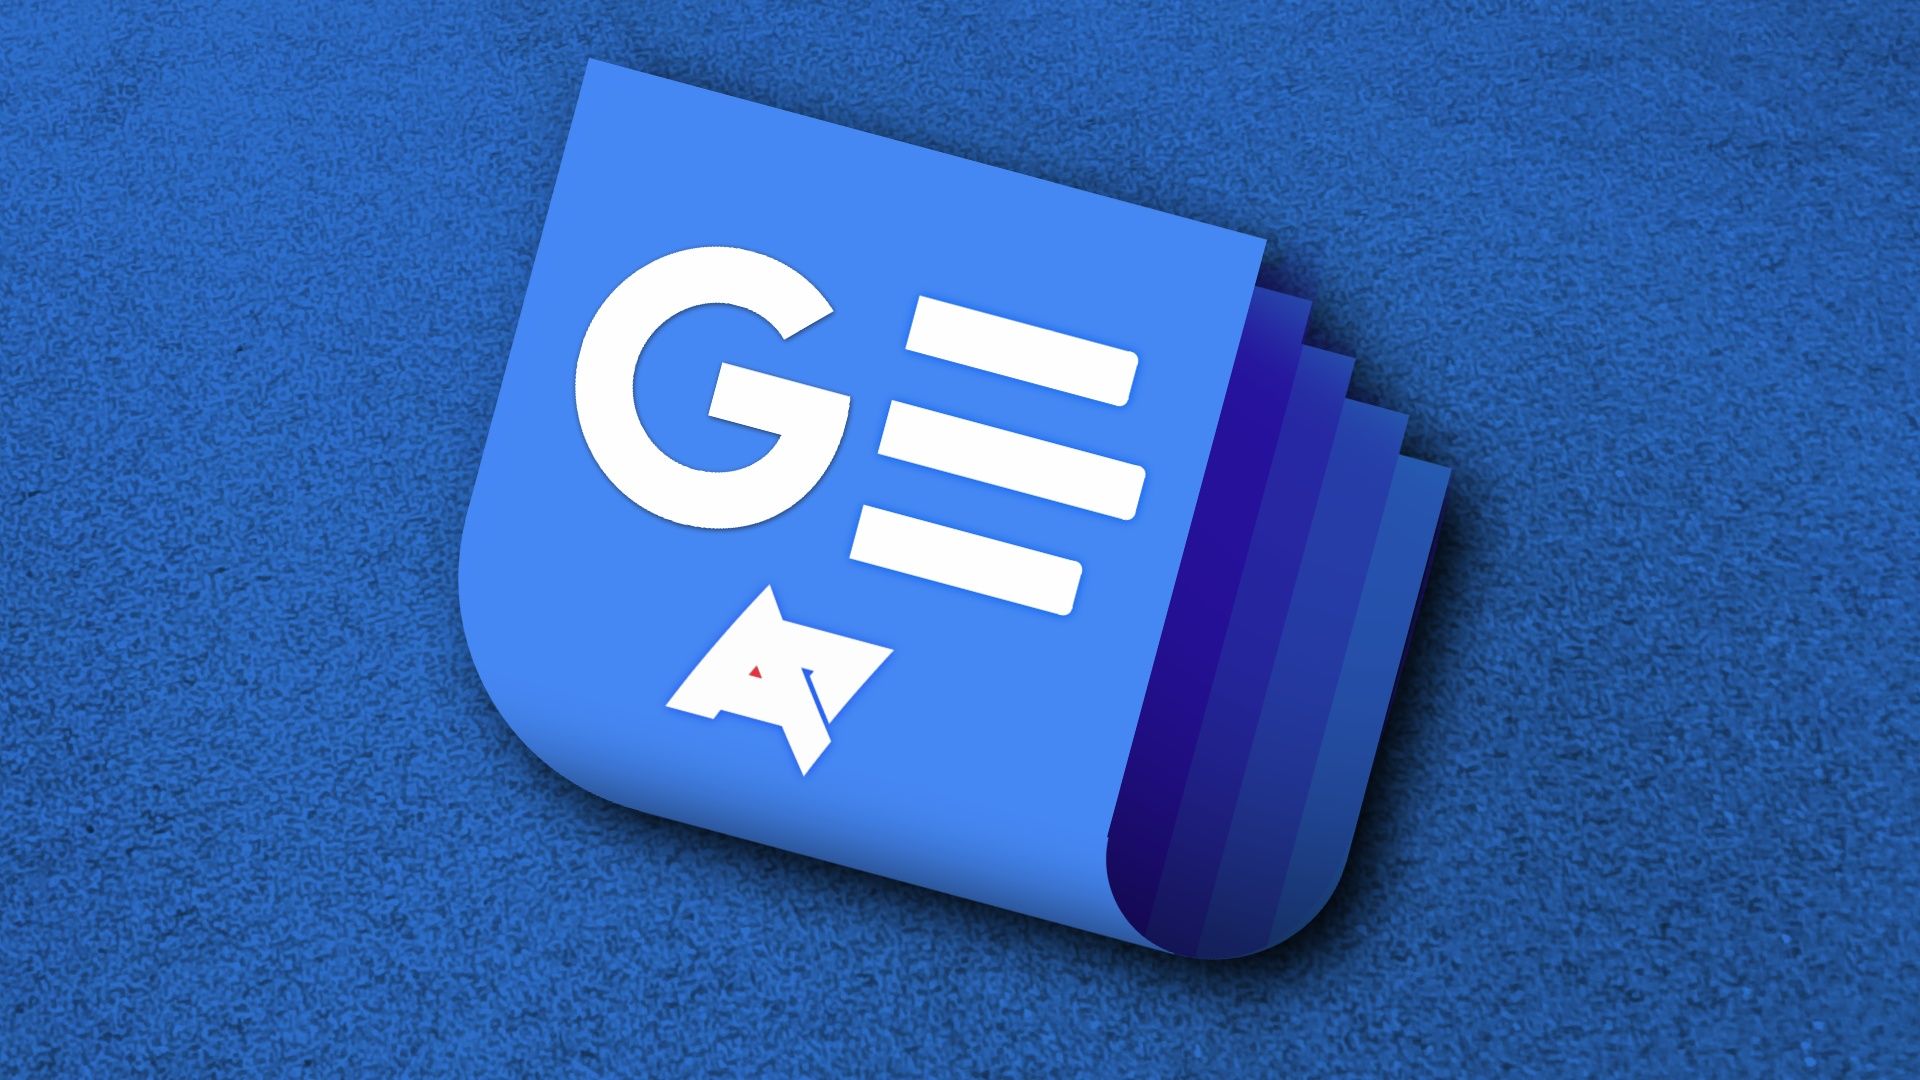 The Google News icon against a blue background